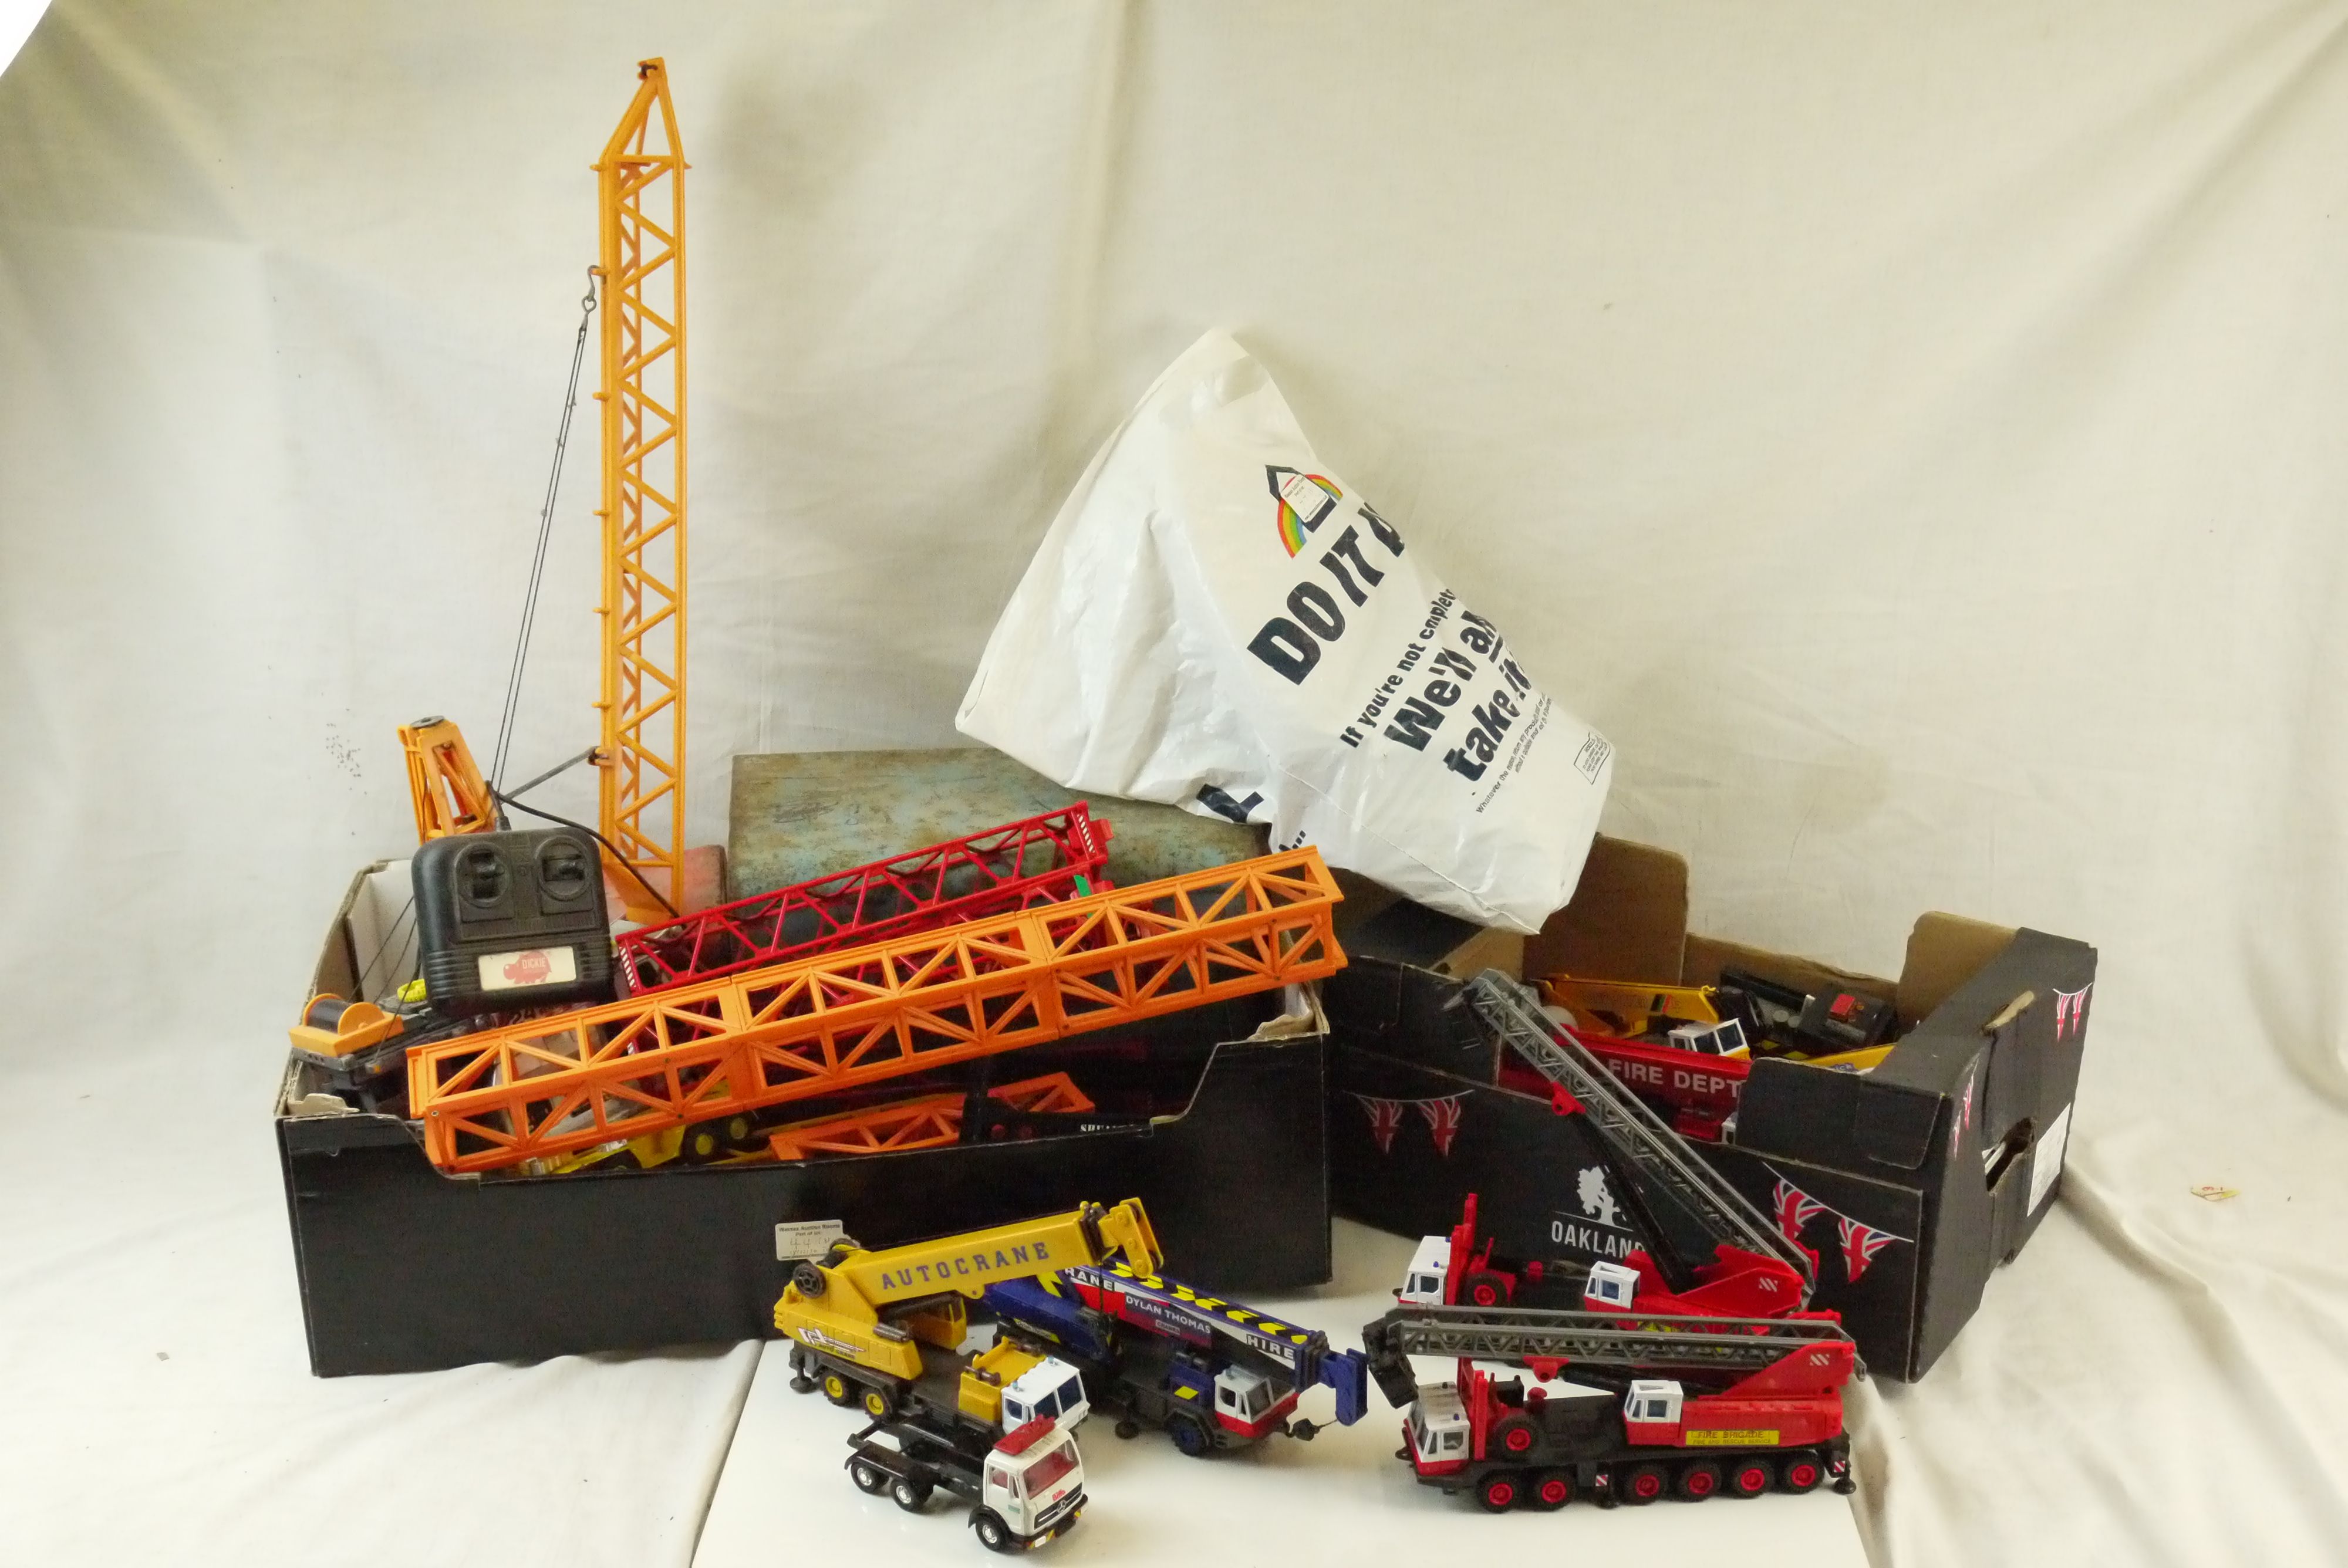 16 x Playworn diecast and plastic construction models to featuring Corgi, Dinky, etc, plus remote